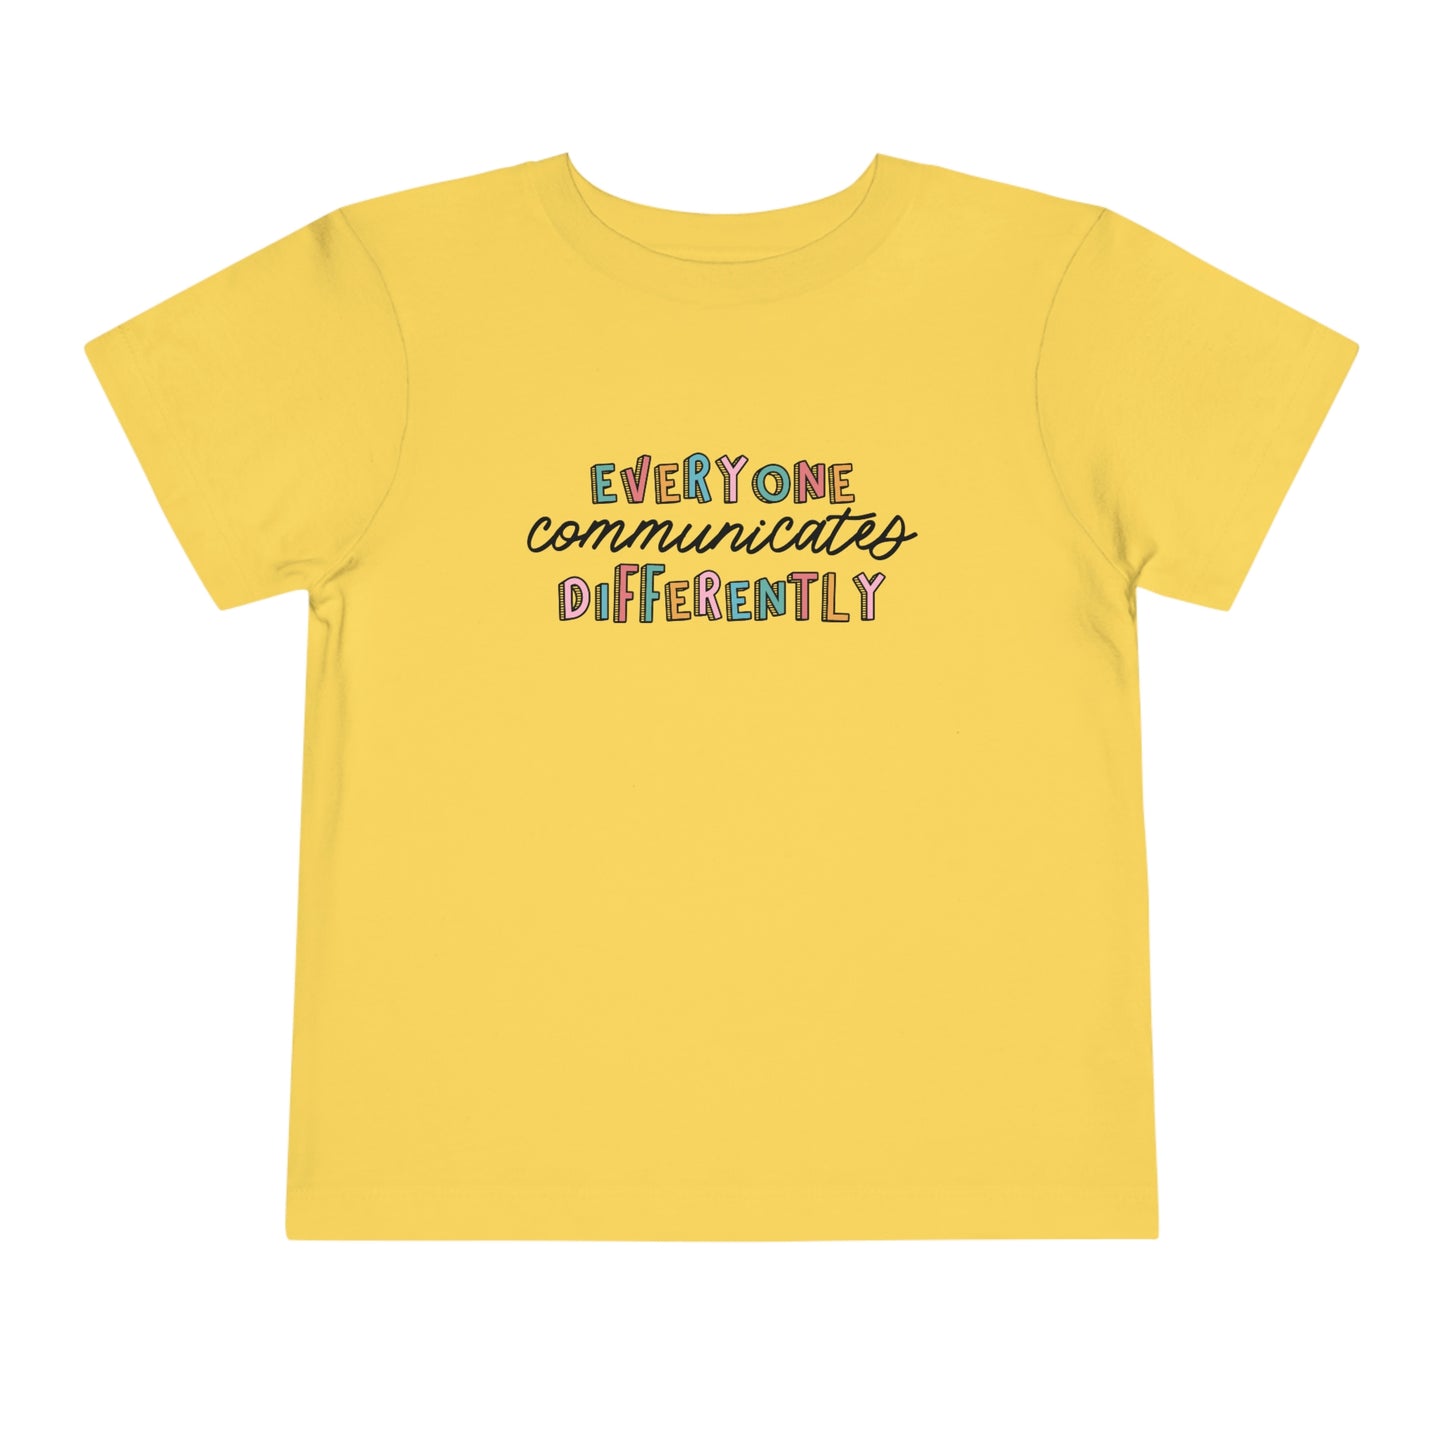 Everyone Communicates Differently Toddler T-Shirt